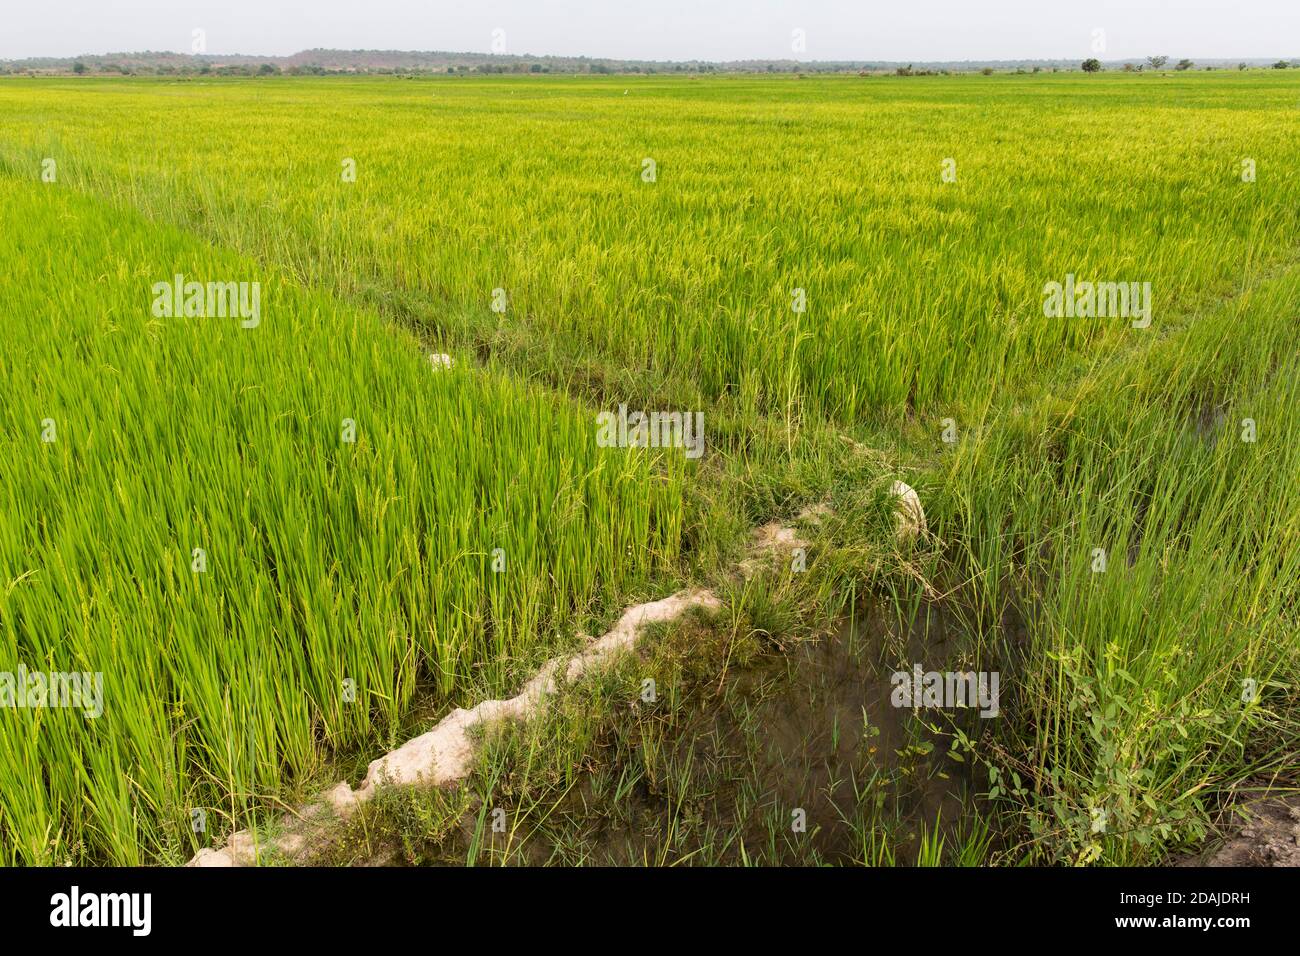 Selingue, Mali, 26th April 2015; Irrigated rice ripening. Normally one hectare of rice requires 4 sacks of NPK and 4 sacks of Uree fertilizer. This costs 100,000 CFA per hectare.  From Selingue the farmer can usually get 5 to 6 tons of rice per hectare. 10 sacks for one ton of rice and maize each can sell for 12,500 per sack, so 120,000 CFA per ton or for 5 tons total value is 600,000 CFA per hectare for the rice. Farmers also pay water charges of 35,000 CFA per season. Stock Photo